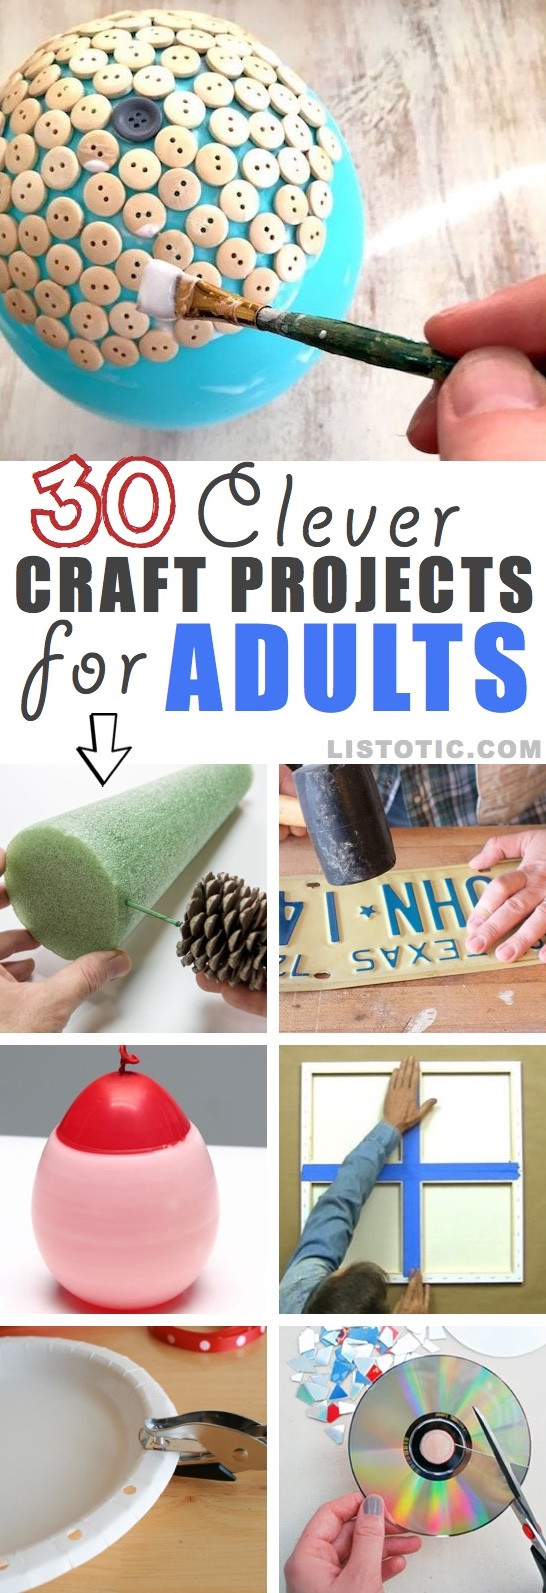 Craft For Adults
 Easy DIY Craft Ideas That Will Spark Your Creativity for